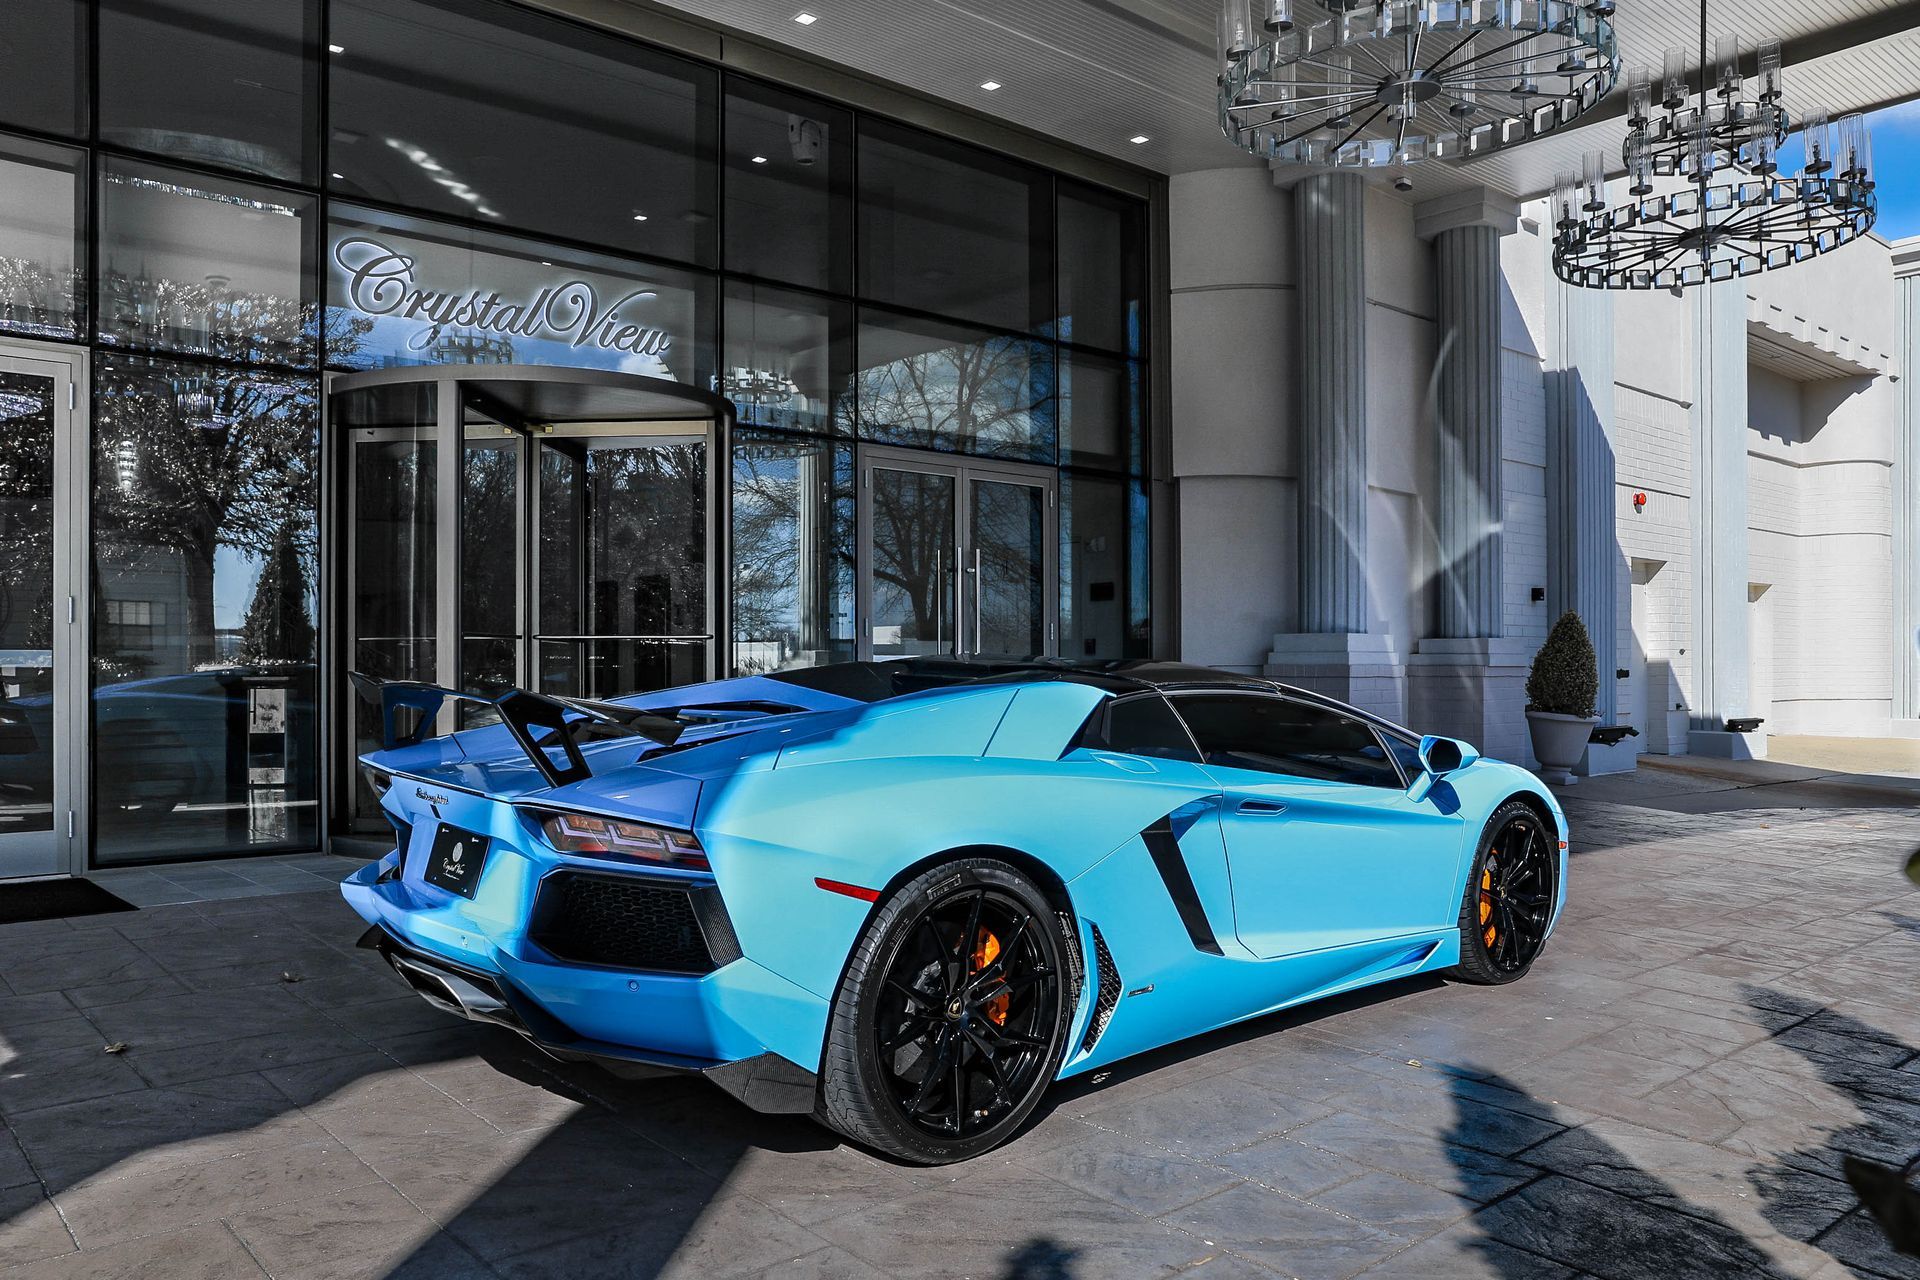 back view luxury car Lamborghini Aventador available for photo opportunities